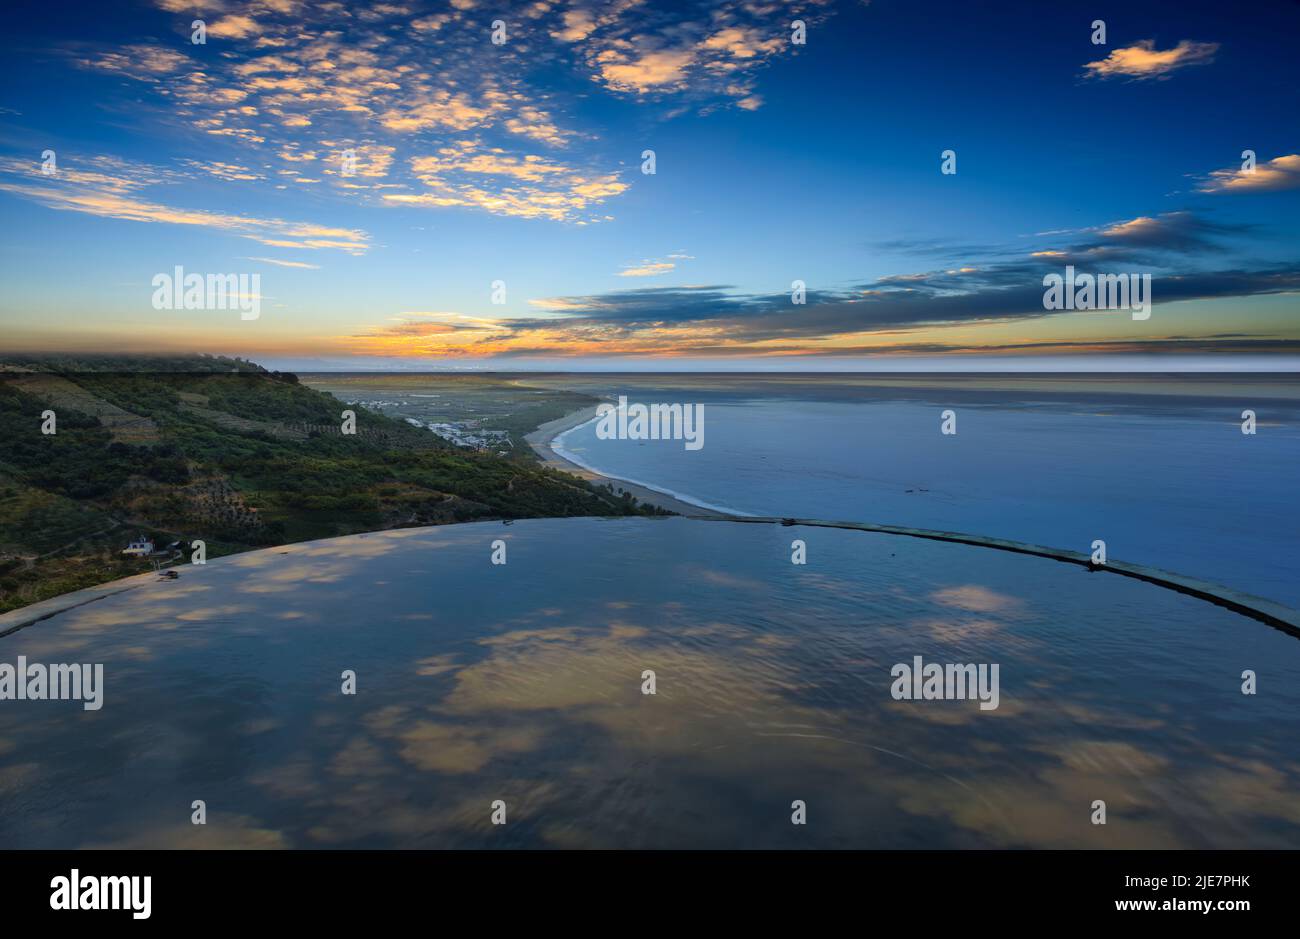 The Landscape View Of The Beautiful Eastern Coastline With Blue Sky And Water Tower Reflection From Huayuan Observation Deck, Taimali, Taitung Stock Photo